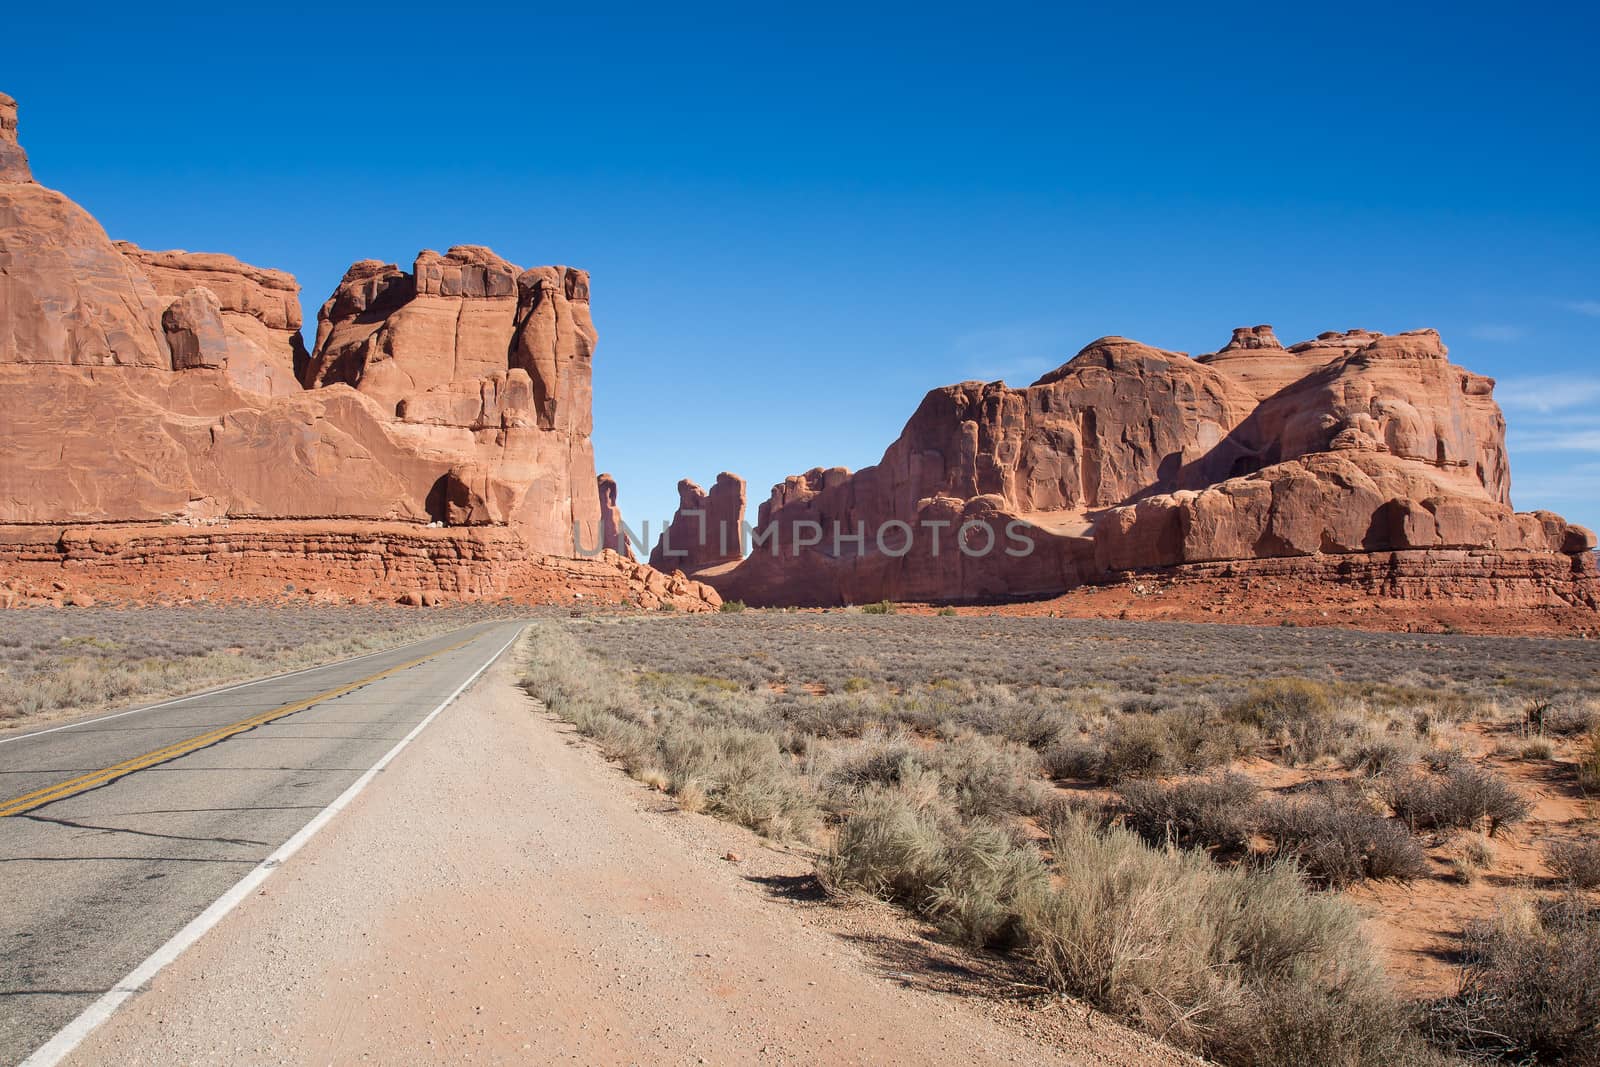 This image shows the drive into Arches where huge rock formations seem to have been thrust  upward from the ground.